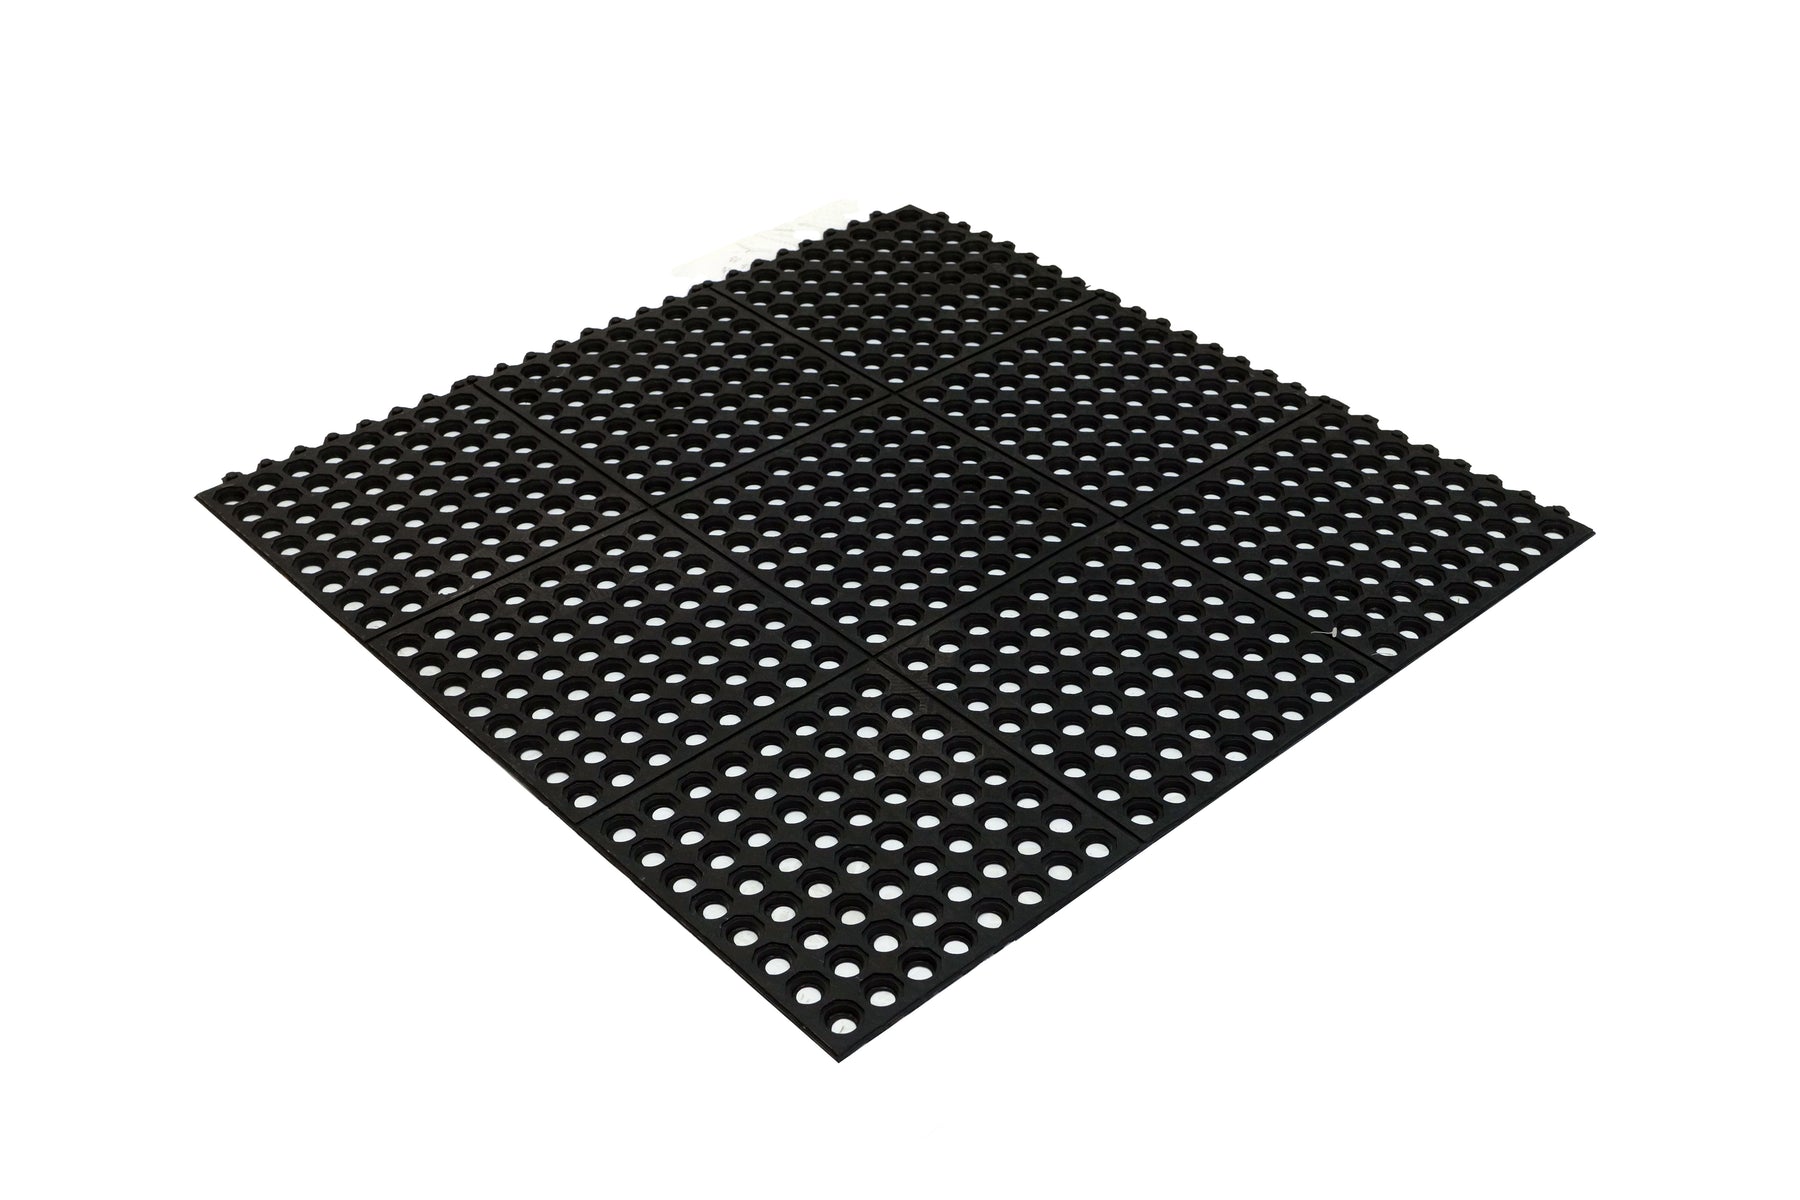 OnlyMat Rubber Flexible and Waterproof Interlocking Ring Hollow Mat - Indoor / Outdoor for Hotels, Hospitals, Restaurant, Kitchen, Oil-Resistant, Washable Mats - Size 90cm x 90cm or 3 feet x 3feet